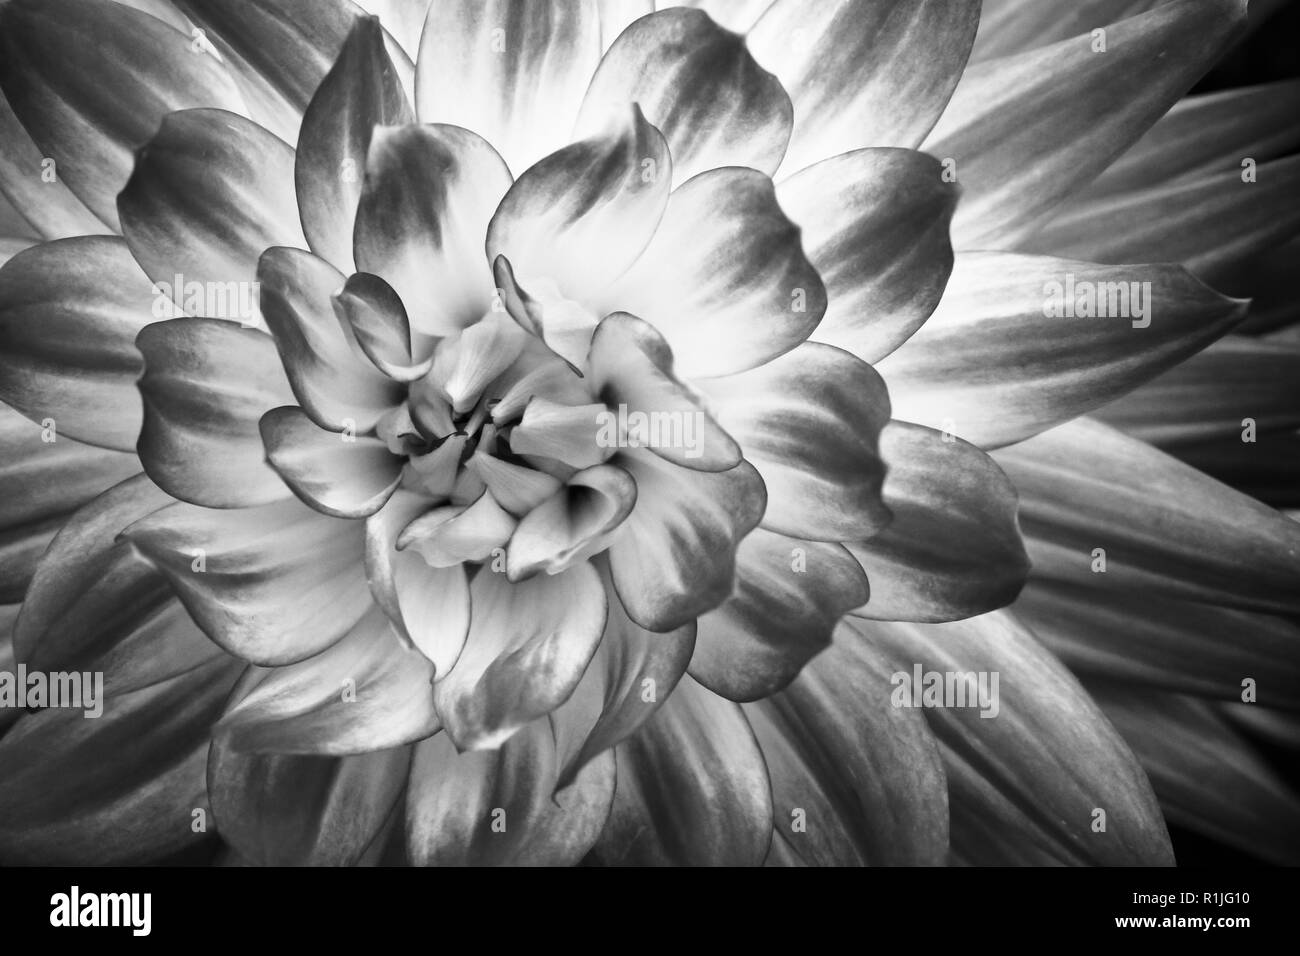 Details of dahlia fresh flower macro photography. Black and white photo emphasizing texture, contrast and intricate geometric floral patterns. Stock Photo